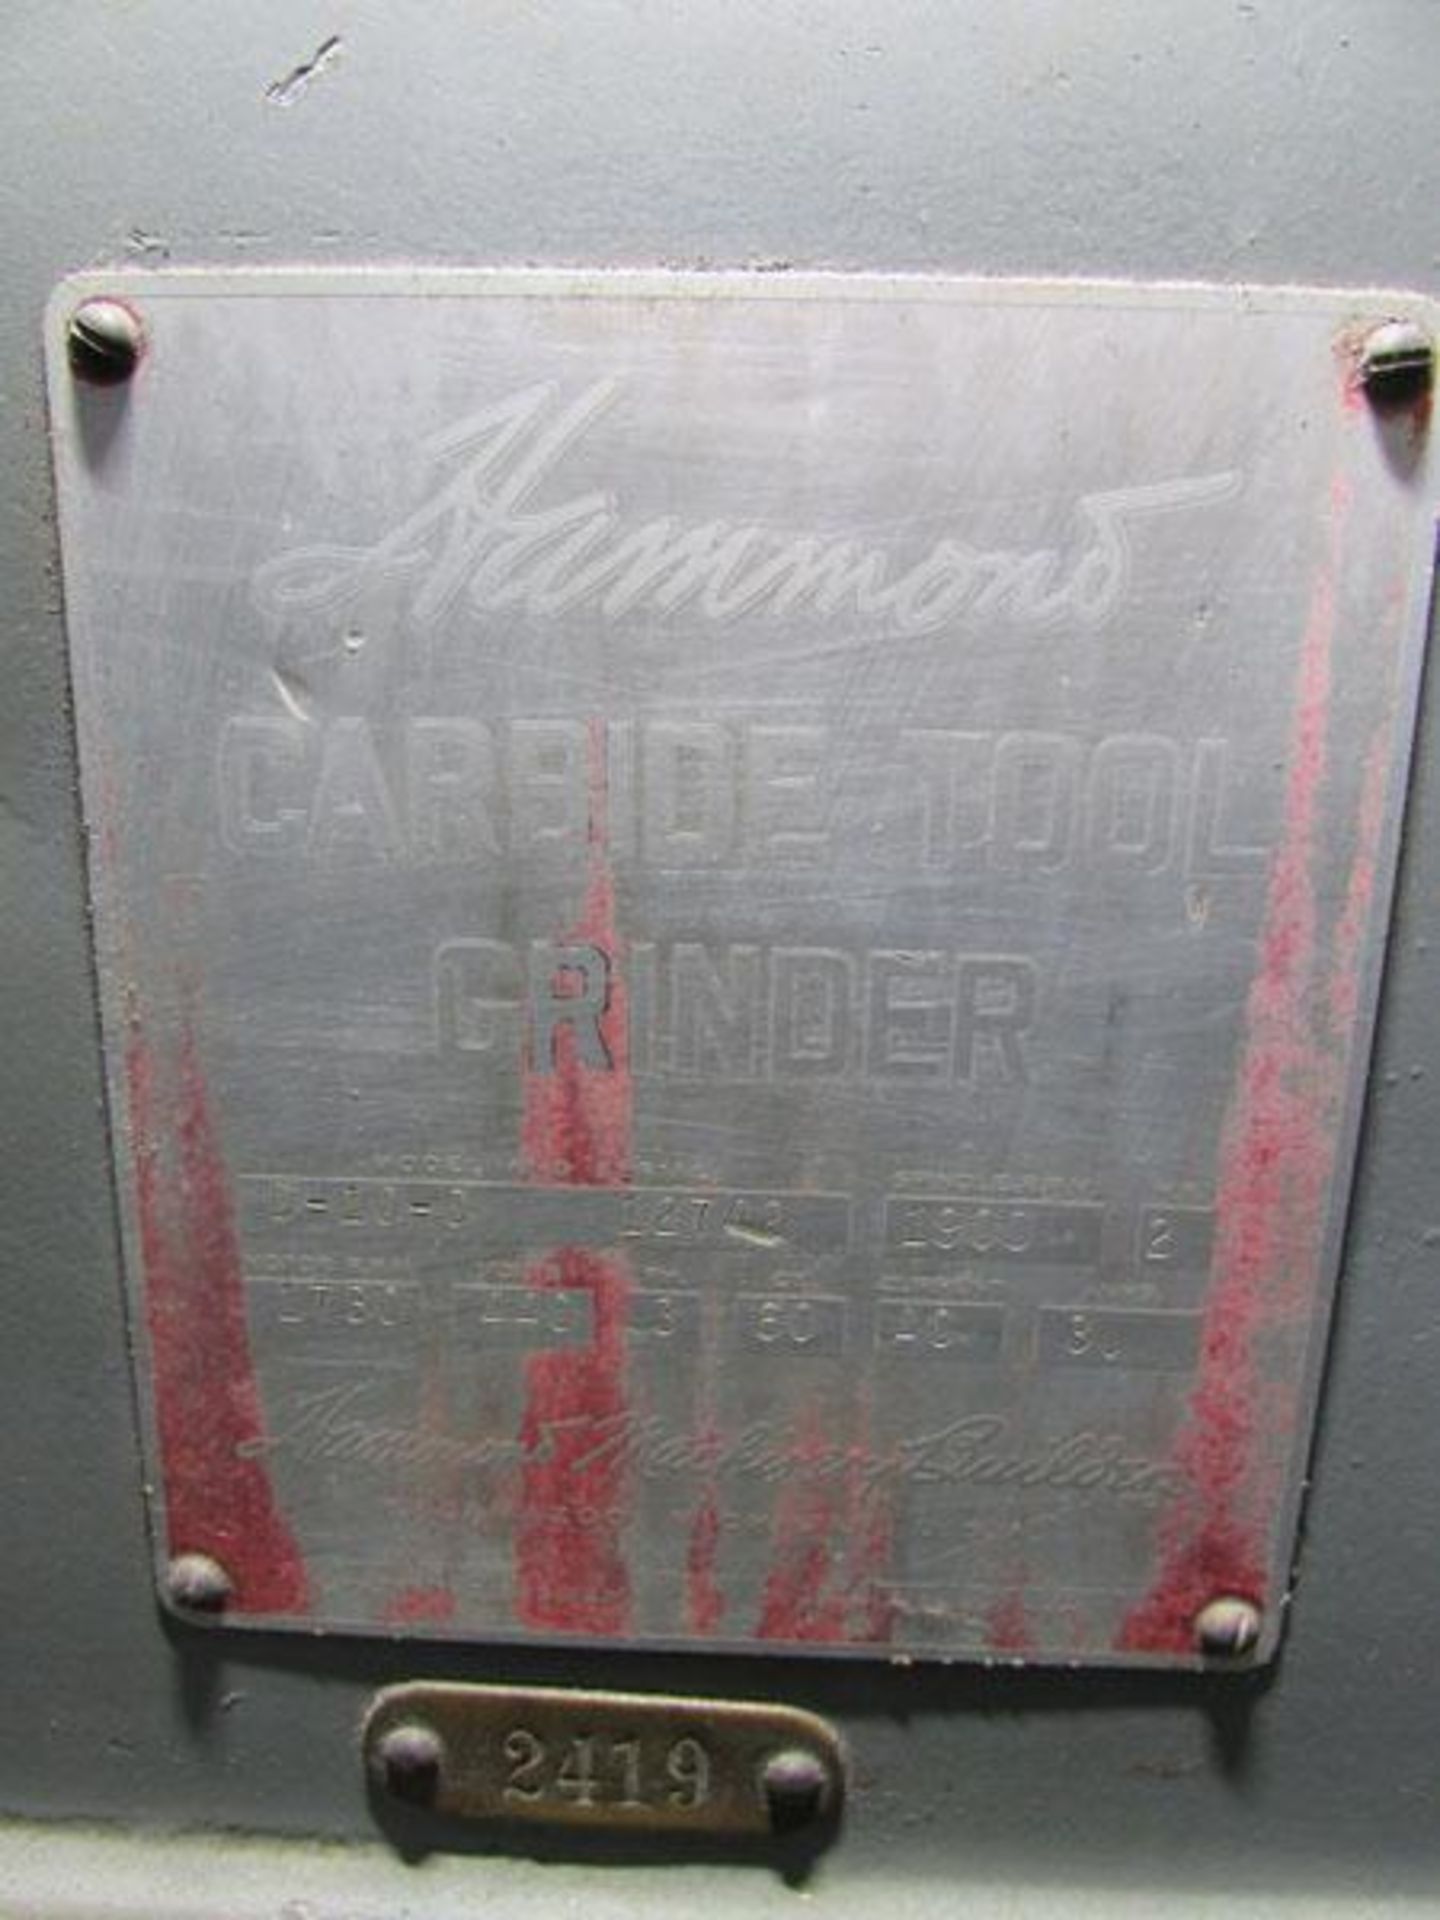 Hammond Machinery Builders D-10-C 10" Double End Carbide Tool Grinder - Image 5 of 5